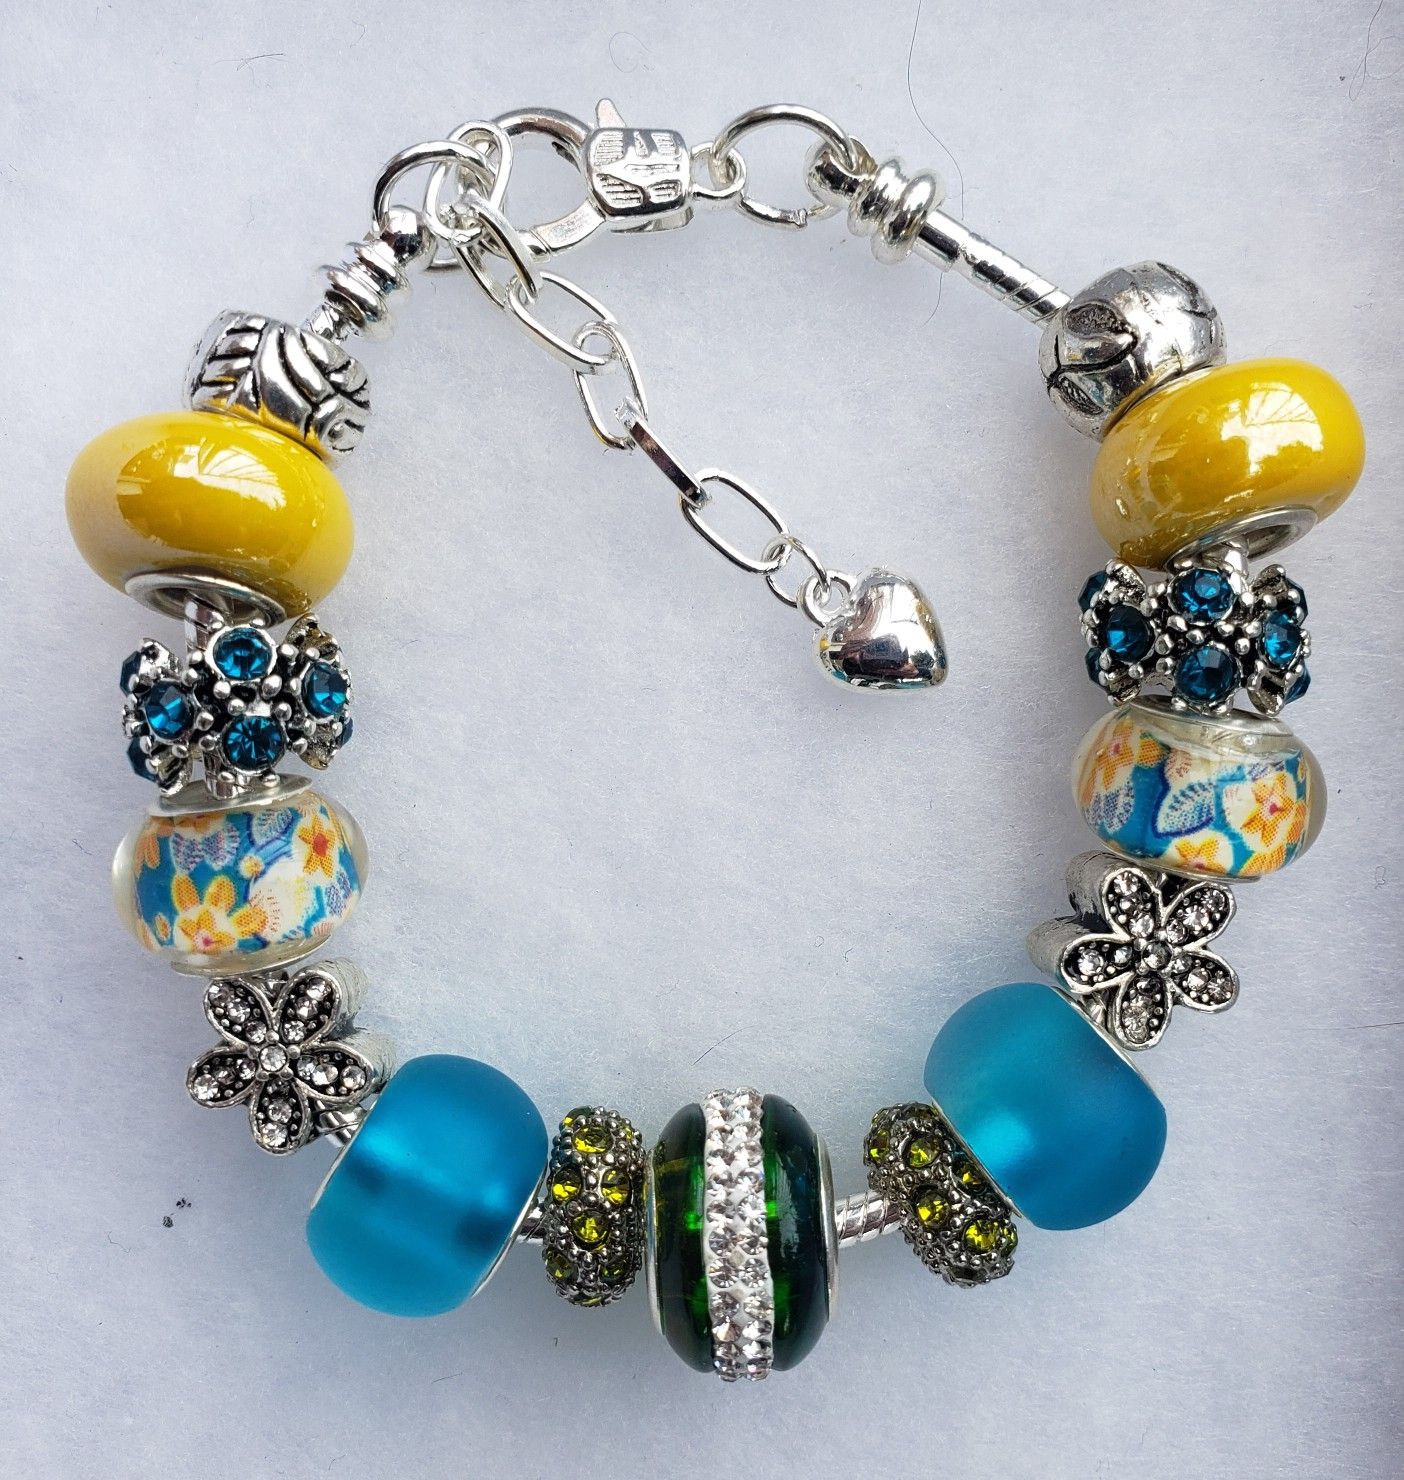 Yellow and bluecharm bracelet 1 for $15 or 2 for $25